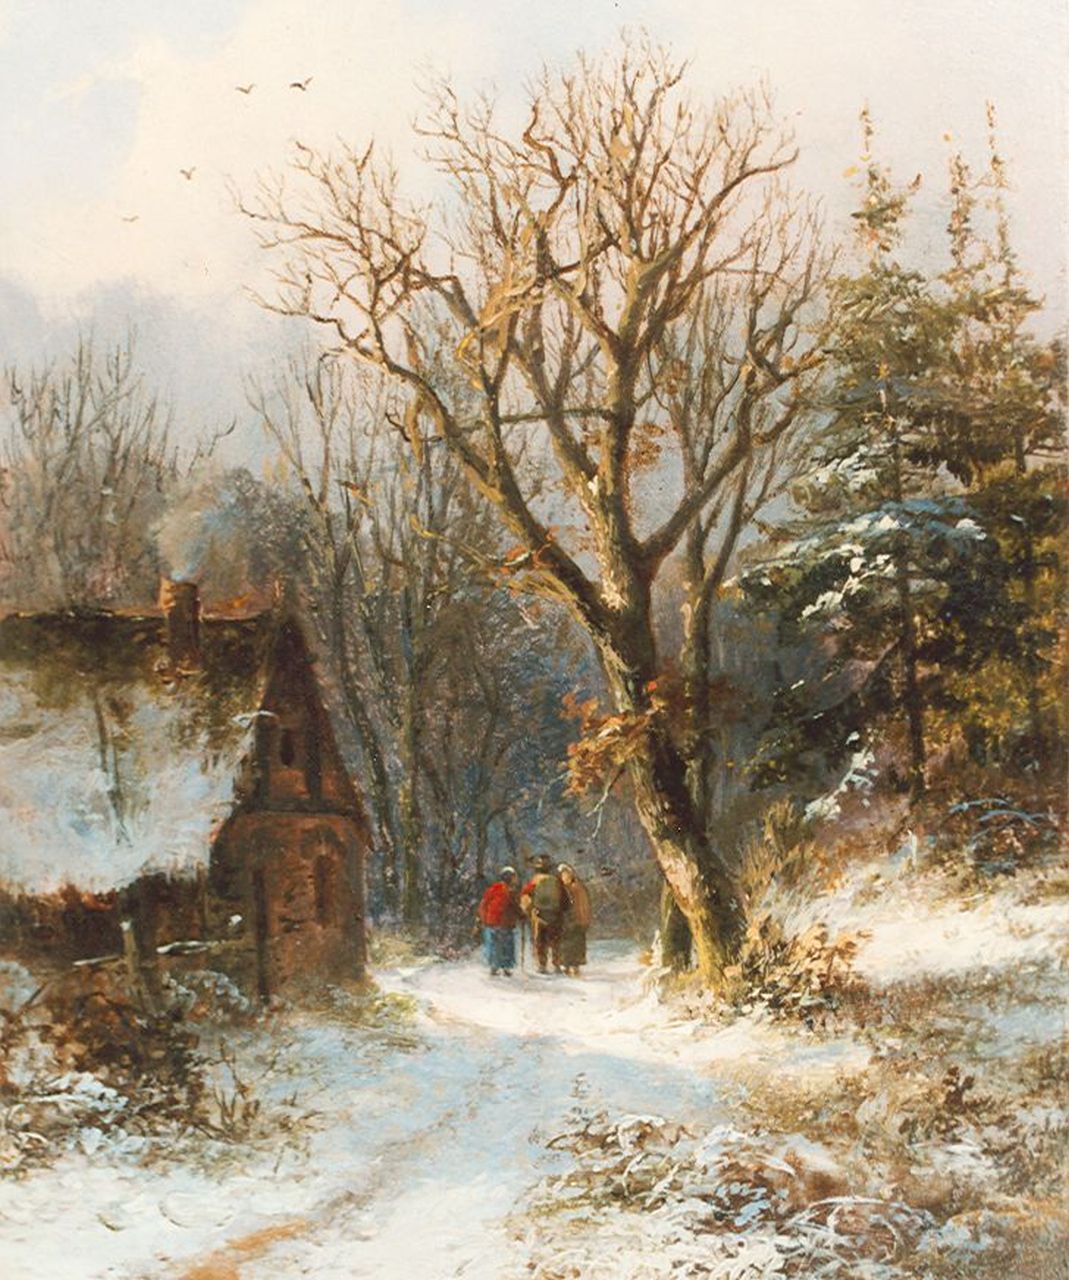 Daiwaille A.J.  | Alexander Joseph Daiwaille, Travellers on a country lane in winter, Öl auf Holz 14,7 x 12,0 cm, signed indistinctly